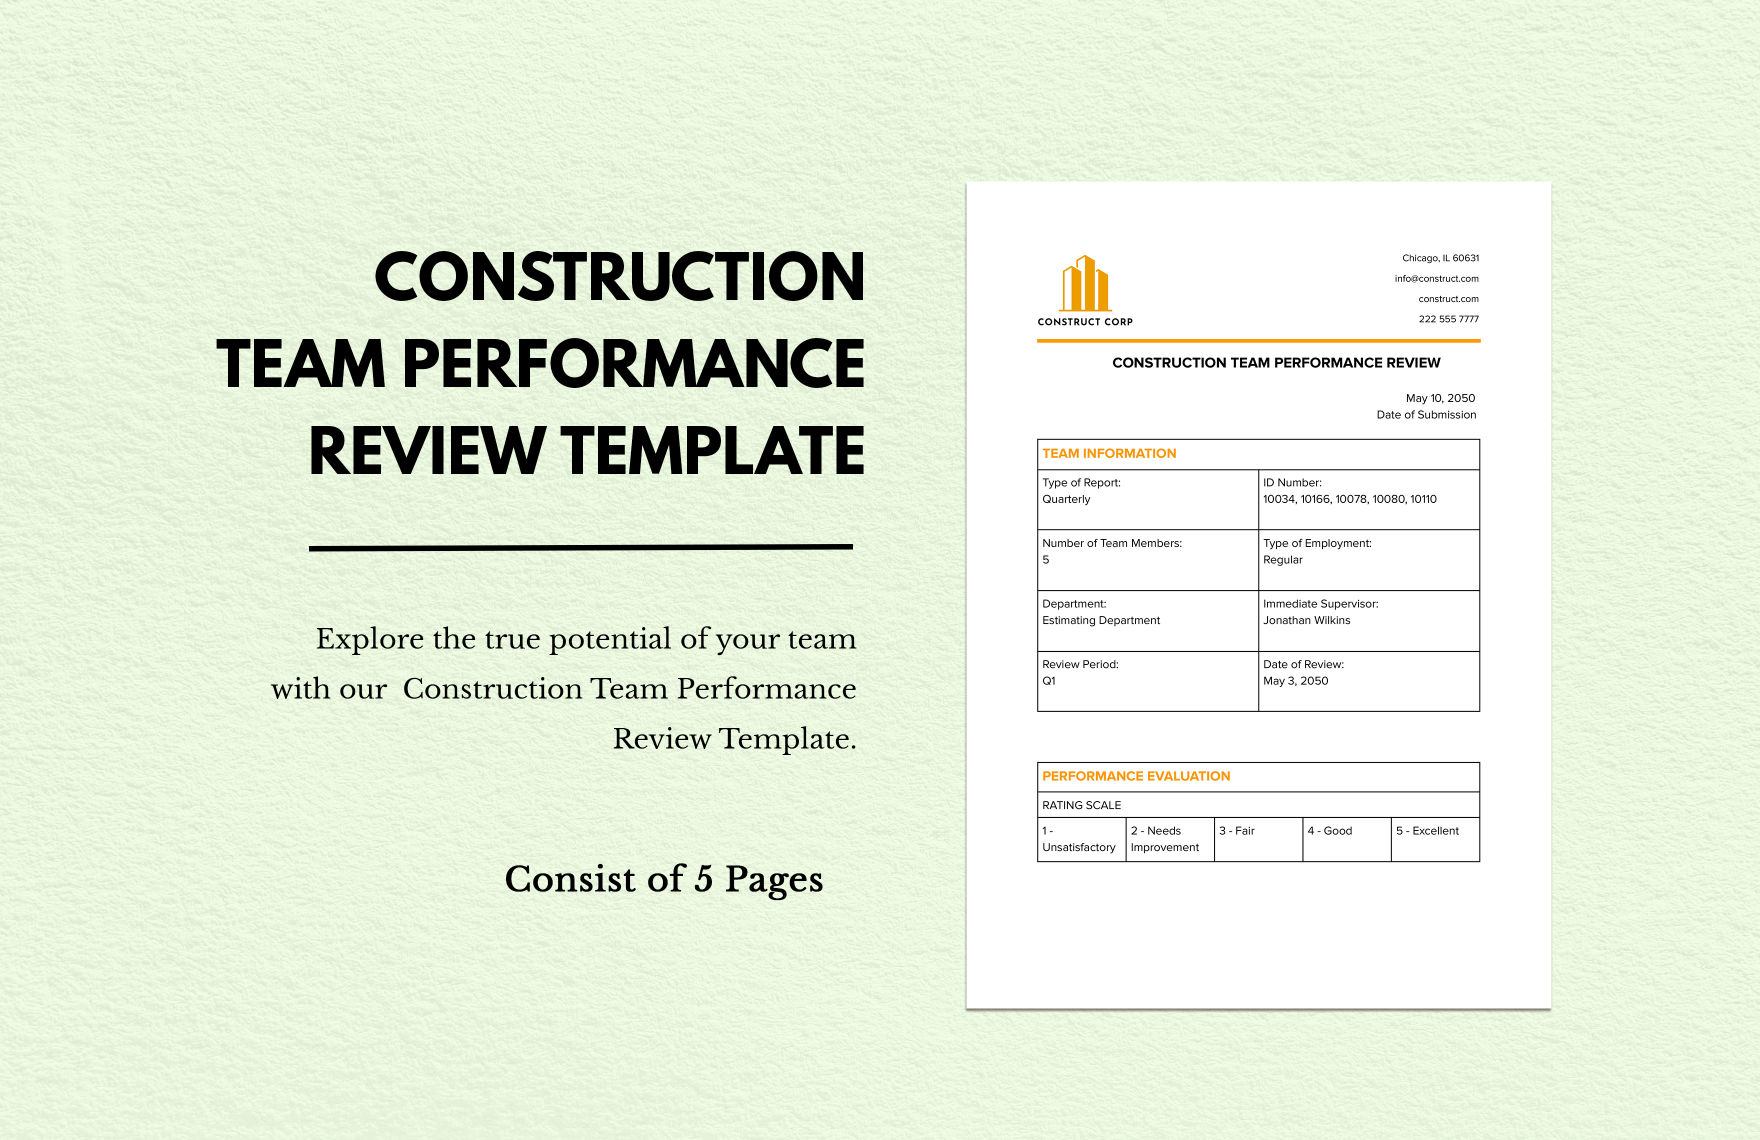 Construction Team Performance Review 